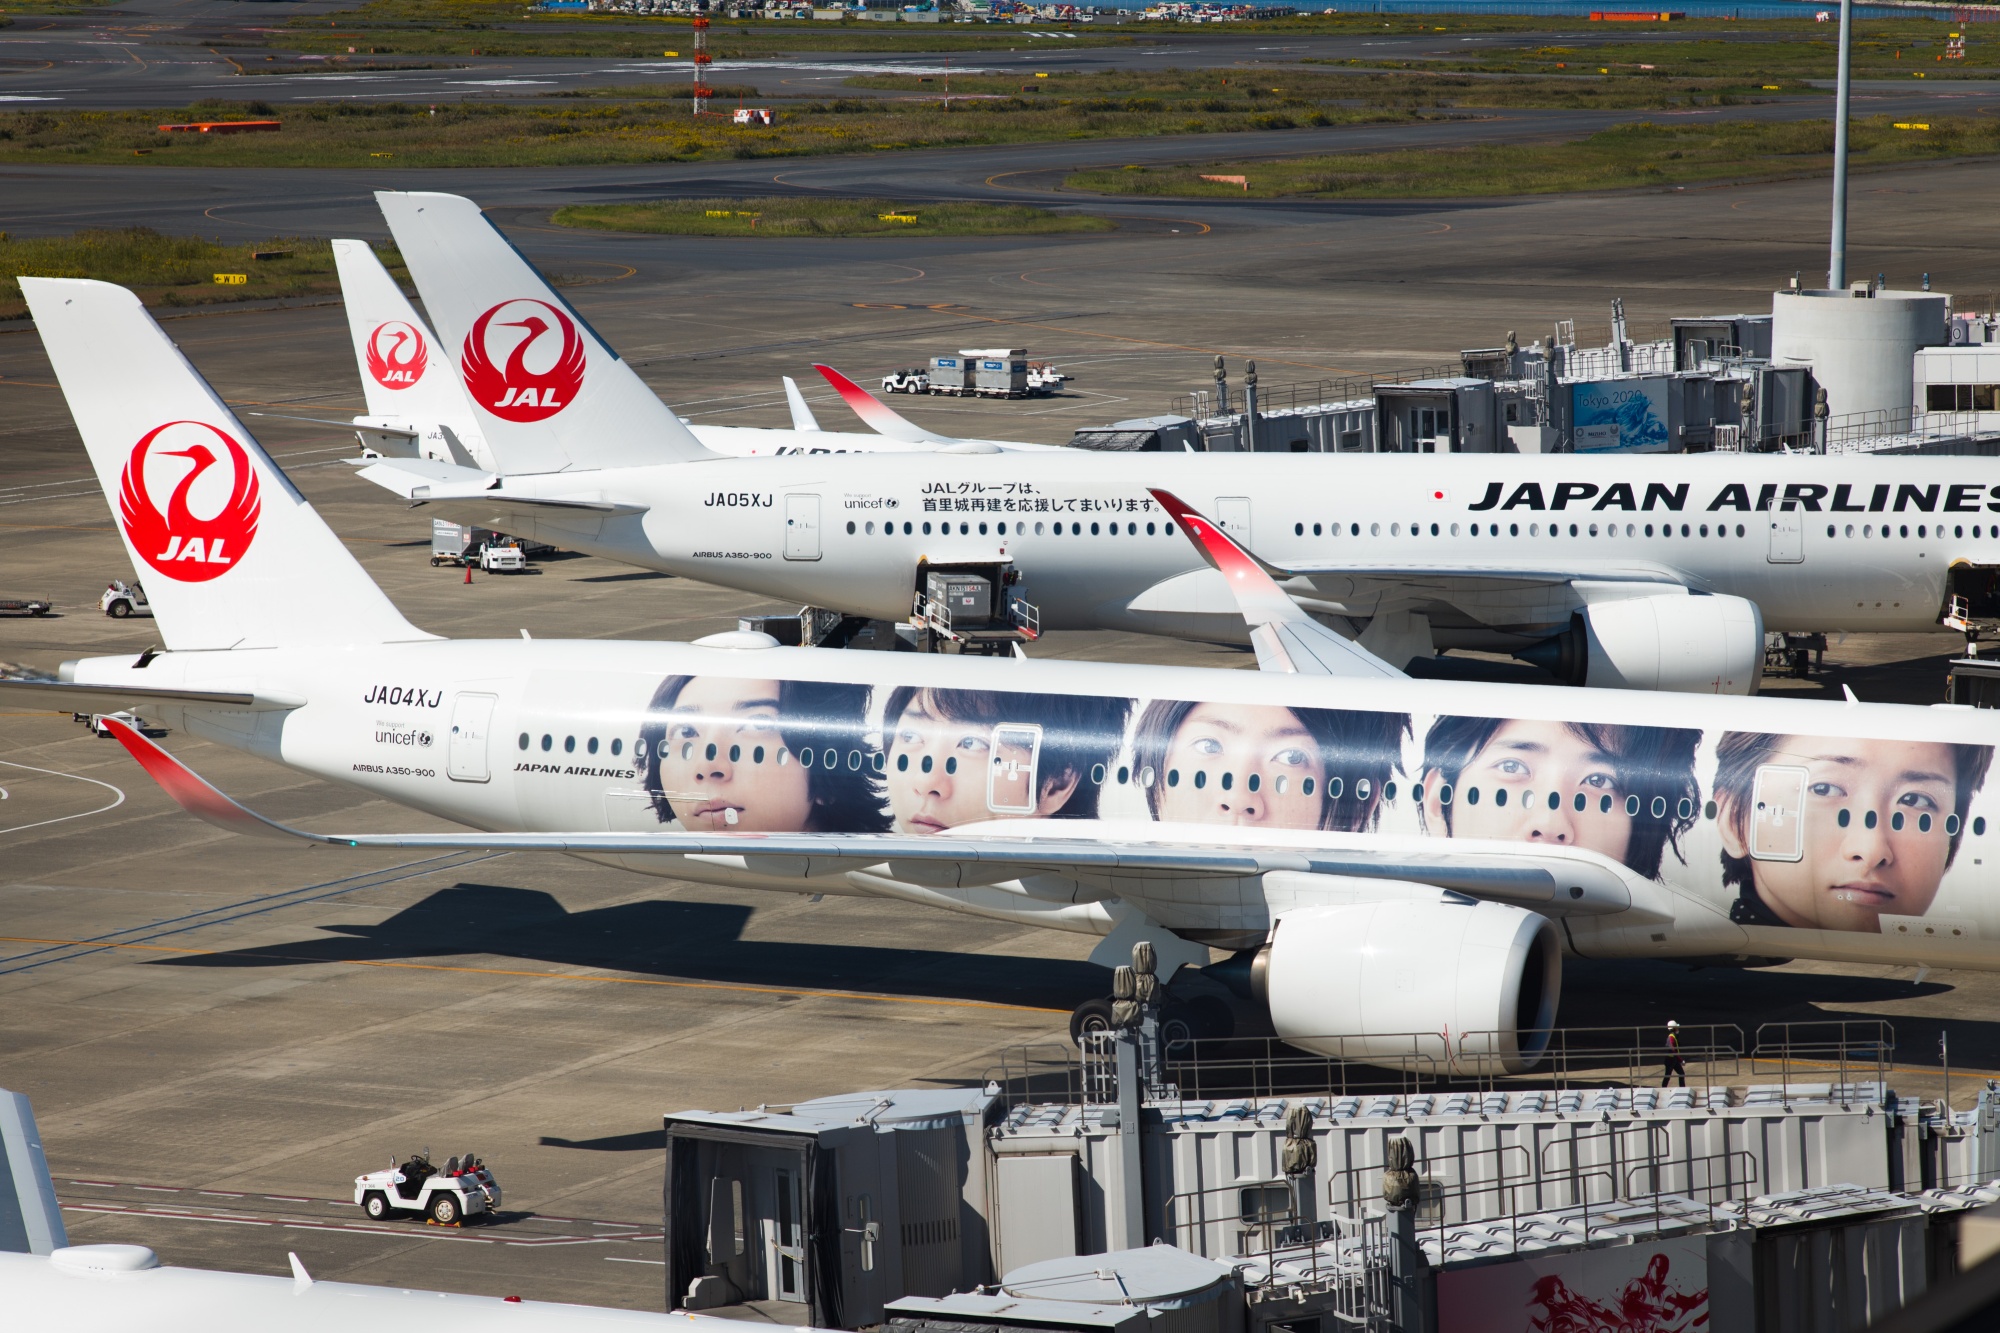 Japan Airlines to Raise as Much as $1.6 Billion From Share Sale